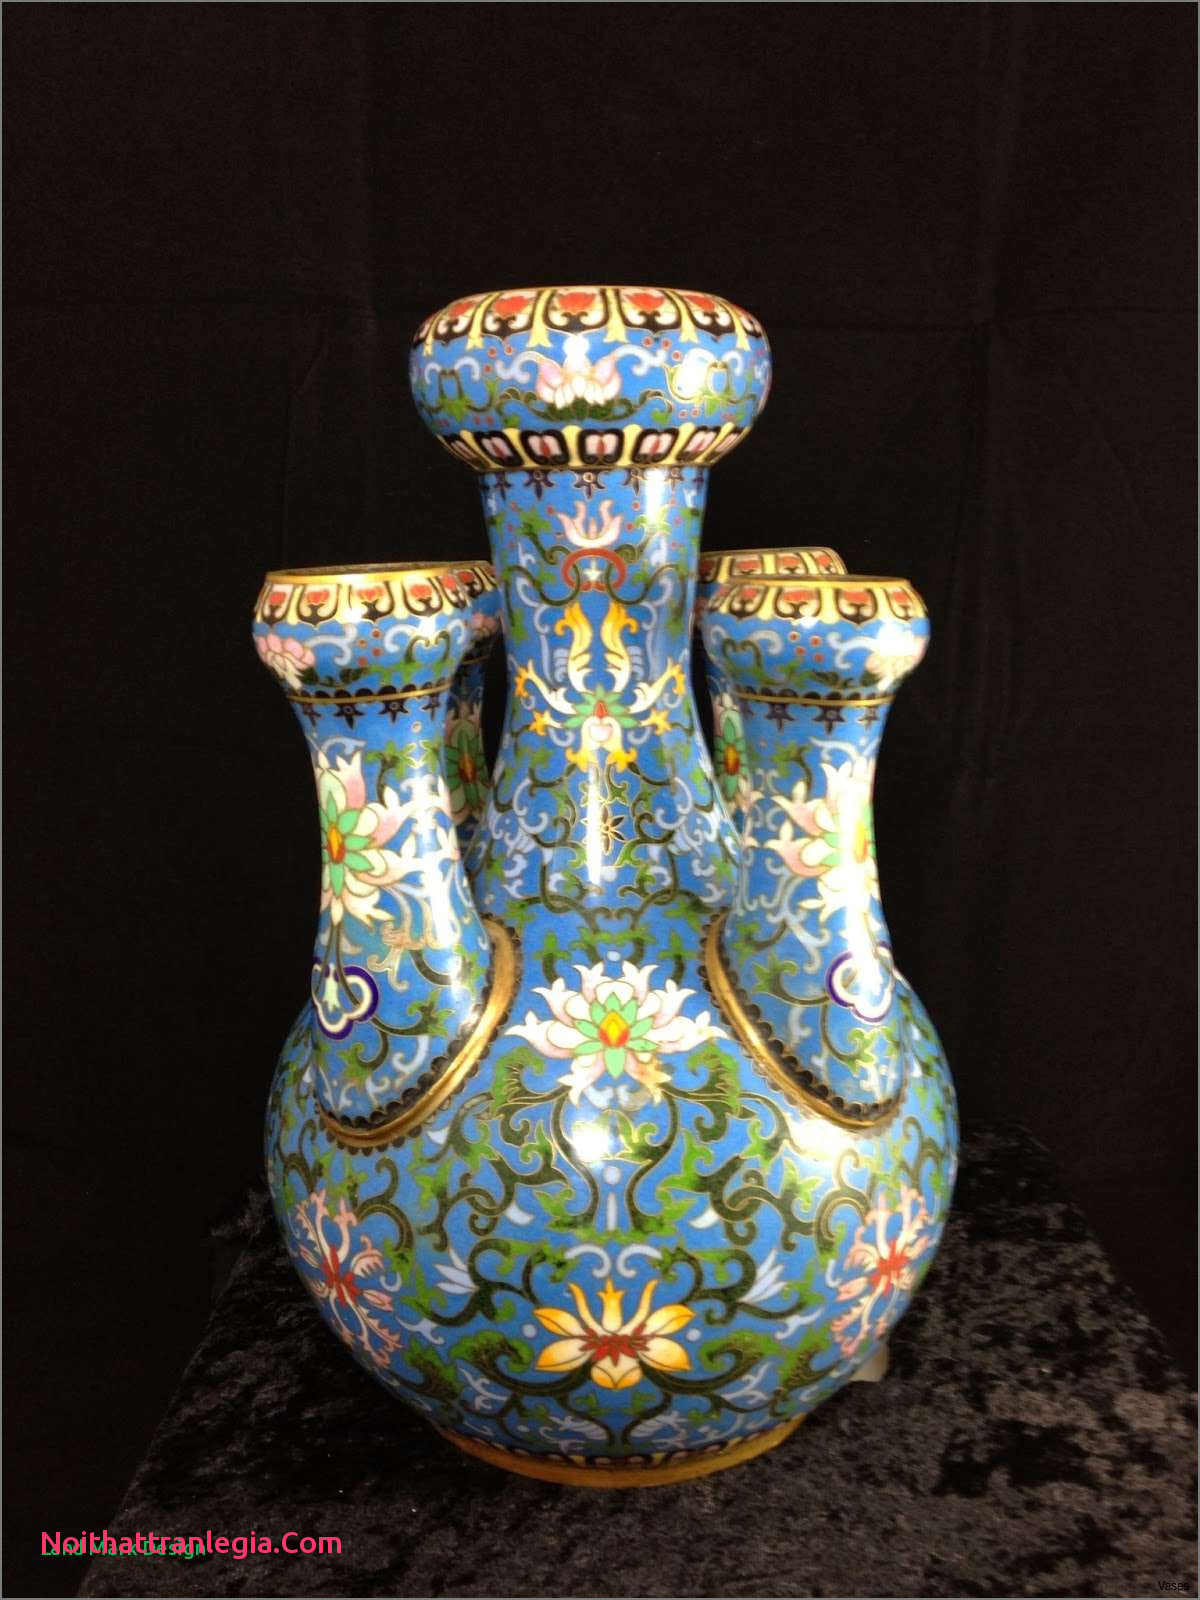 19 Lovely Antique Chinese Glass Vase 2024 free download antique chinese glass vase of 20 chinese antique vase noithattranlegia vases design with regard to 213 1h vases antique asian the increased trade of chinese ware during 16th century has sign